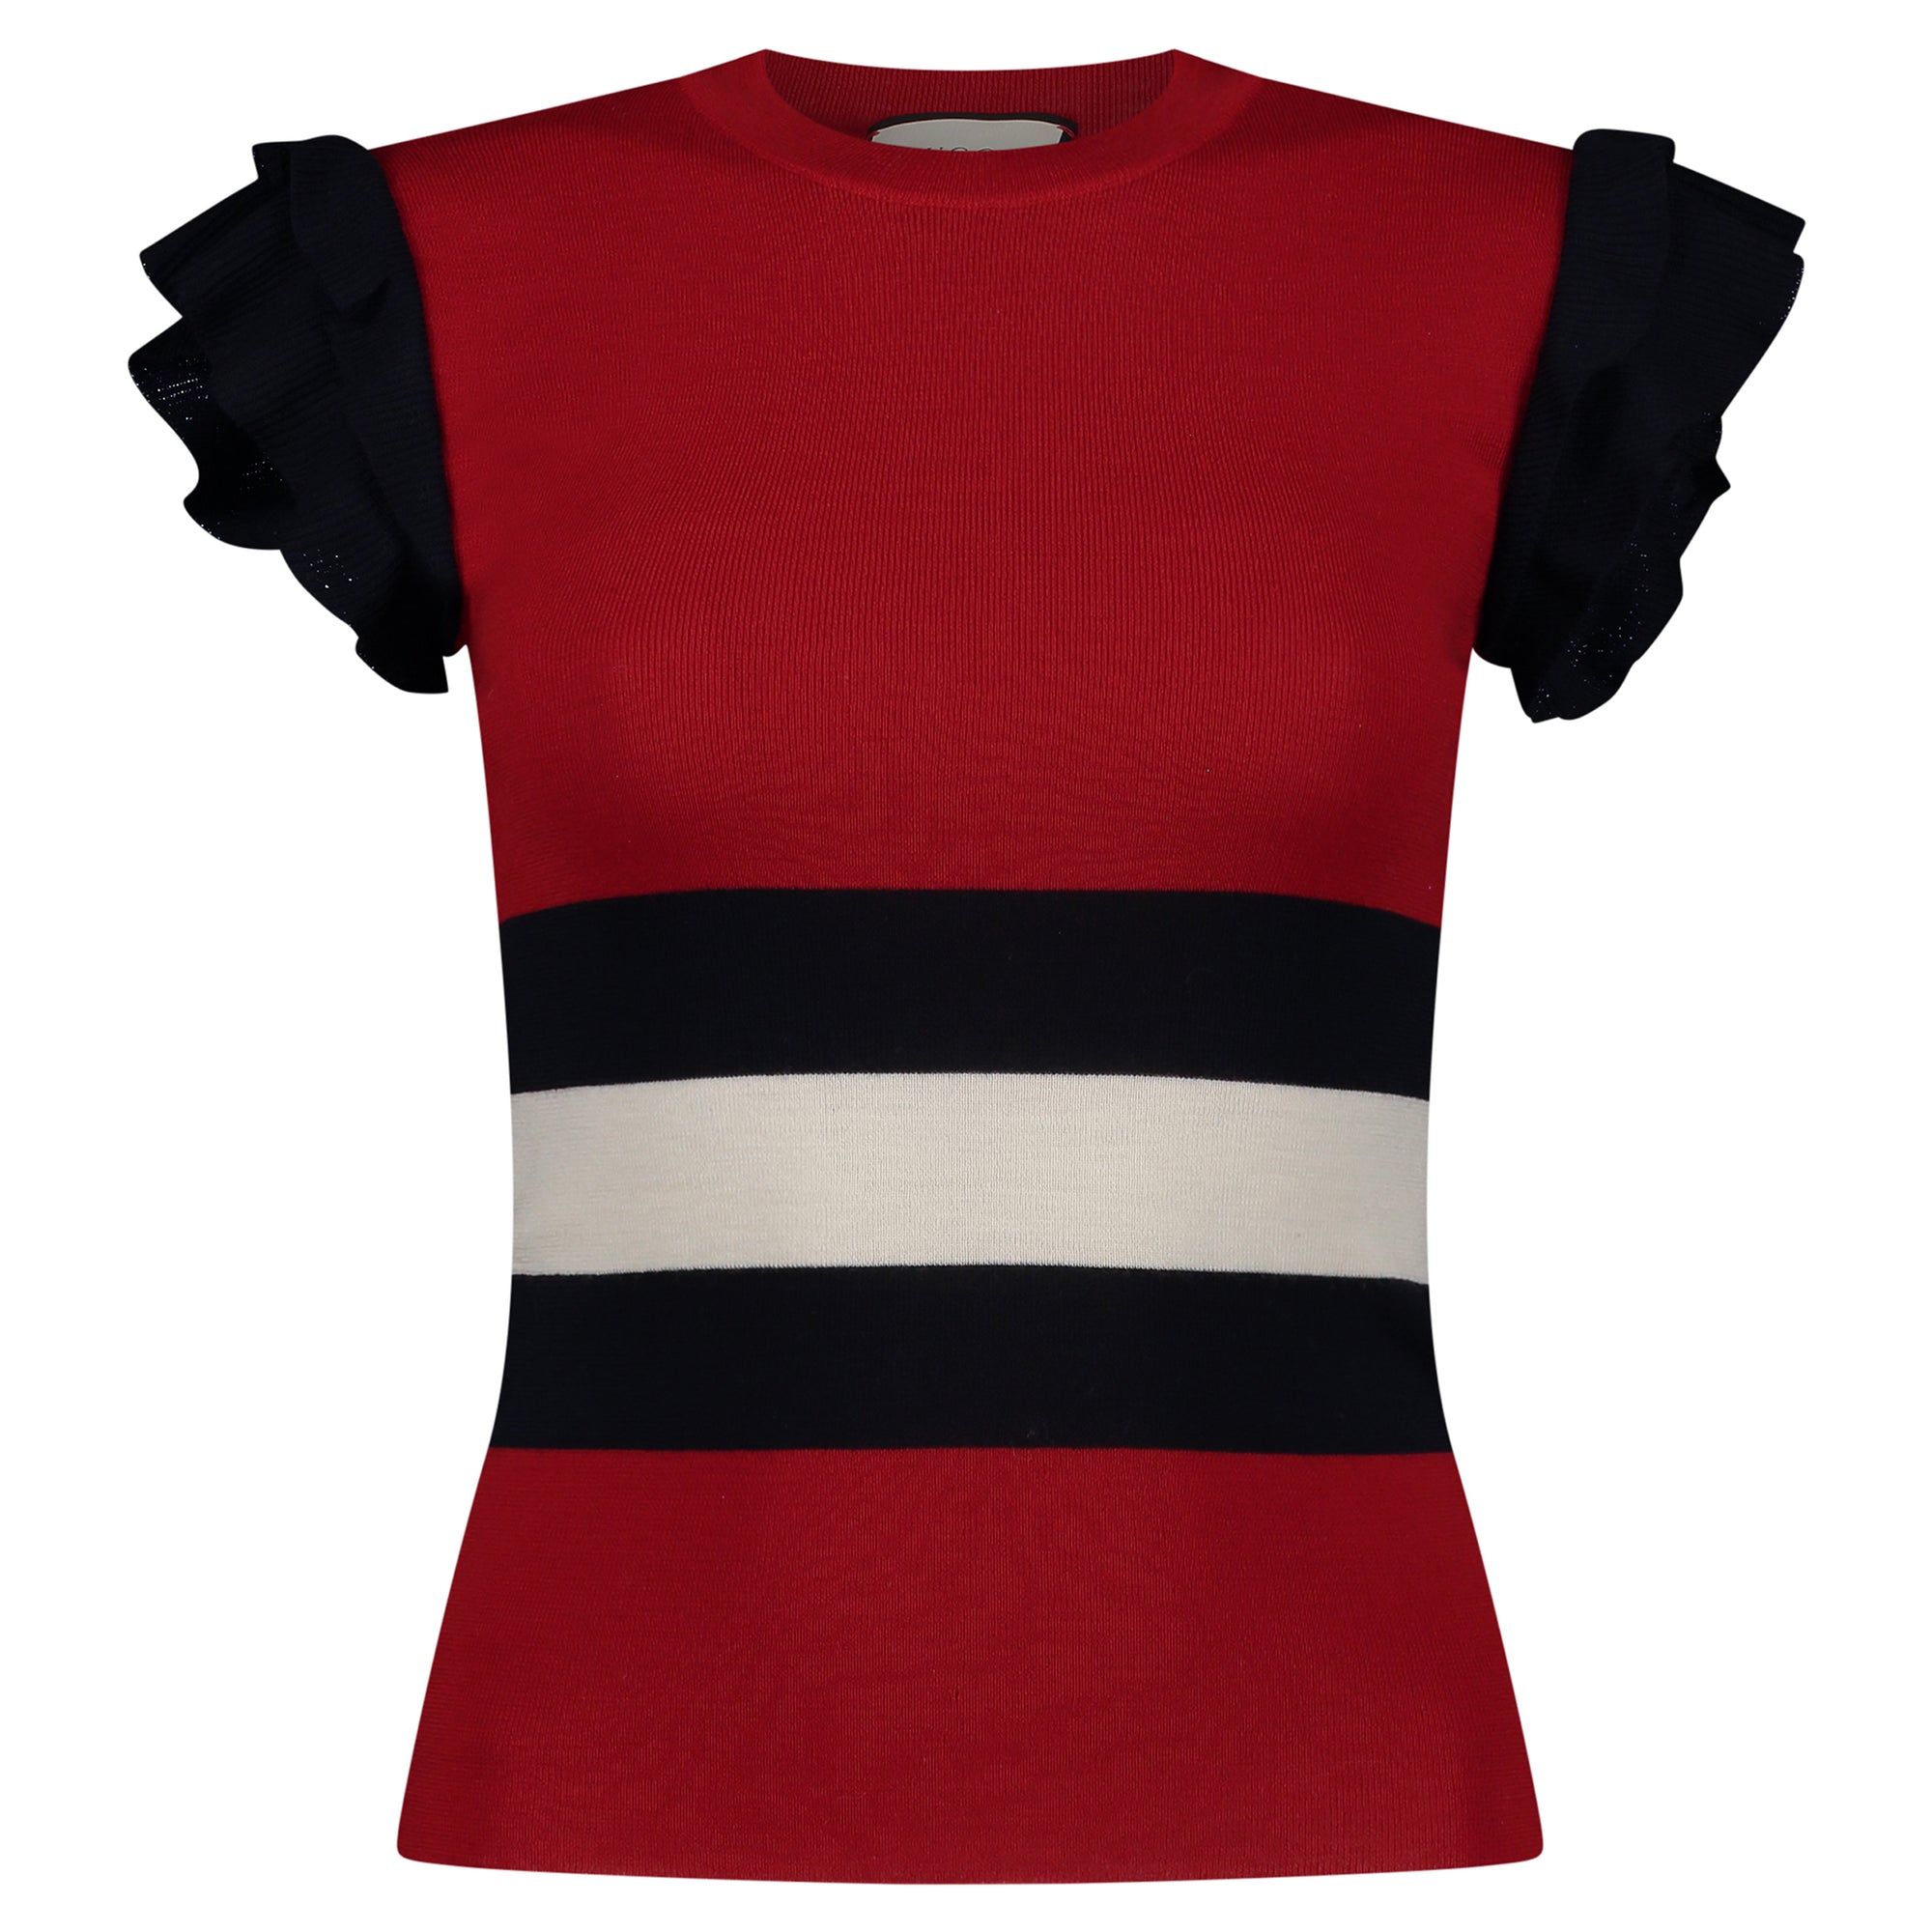 Gucci Knit Wool Red Top